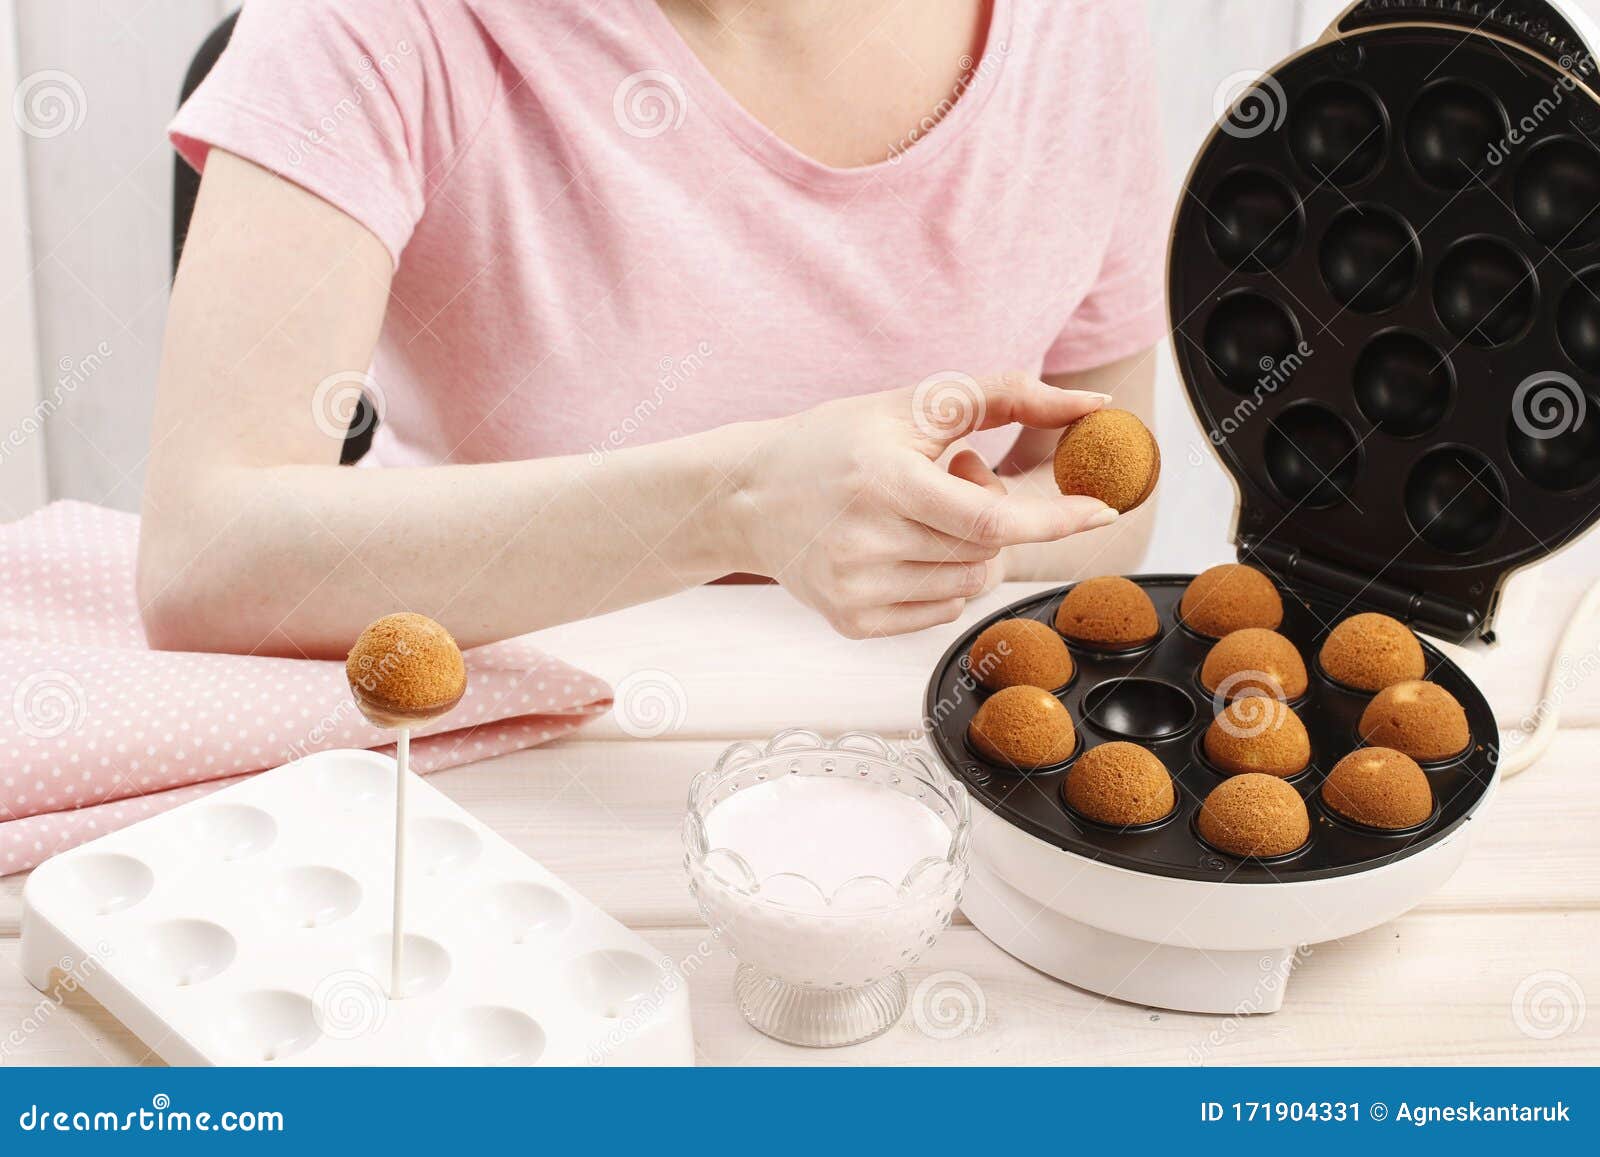 How To Make Cake Pops Tutorial Stock Image Image Of Girl Hand